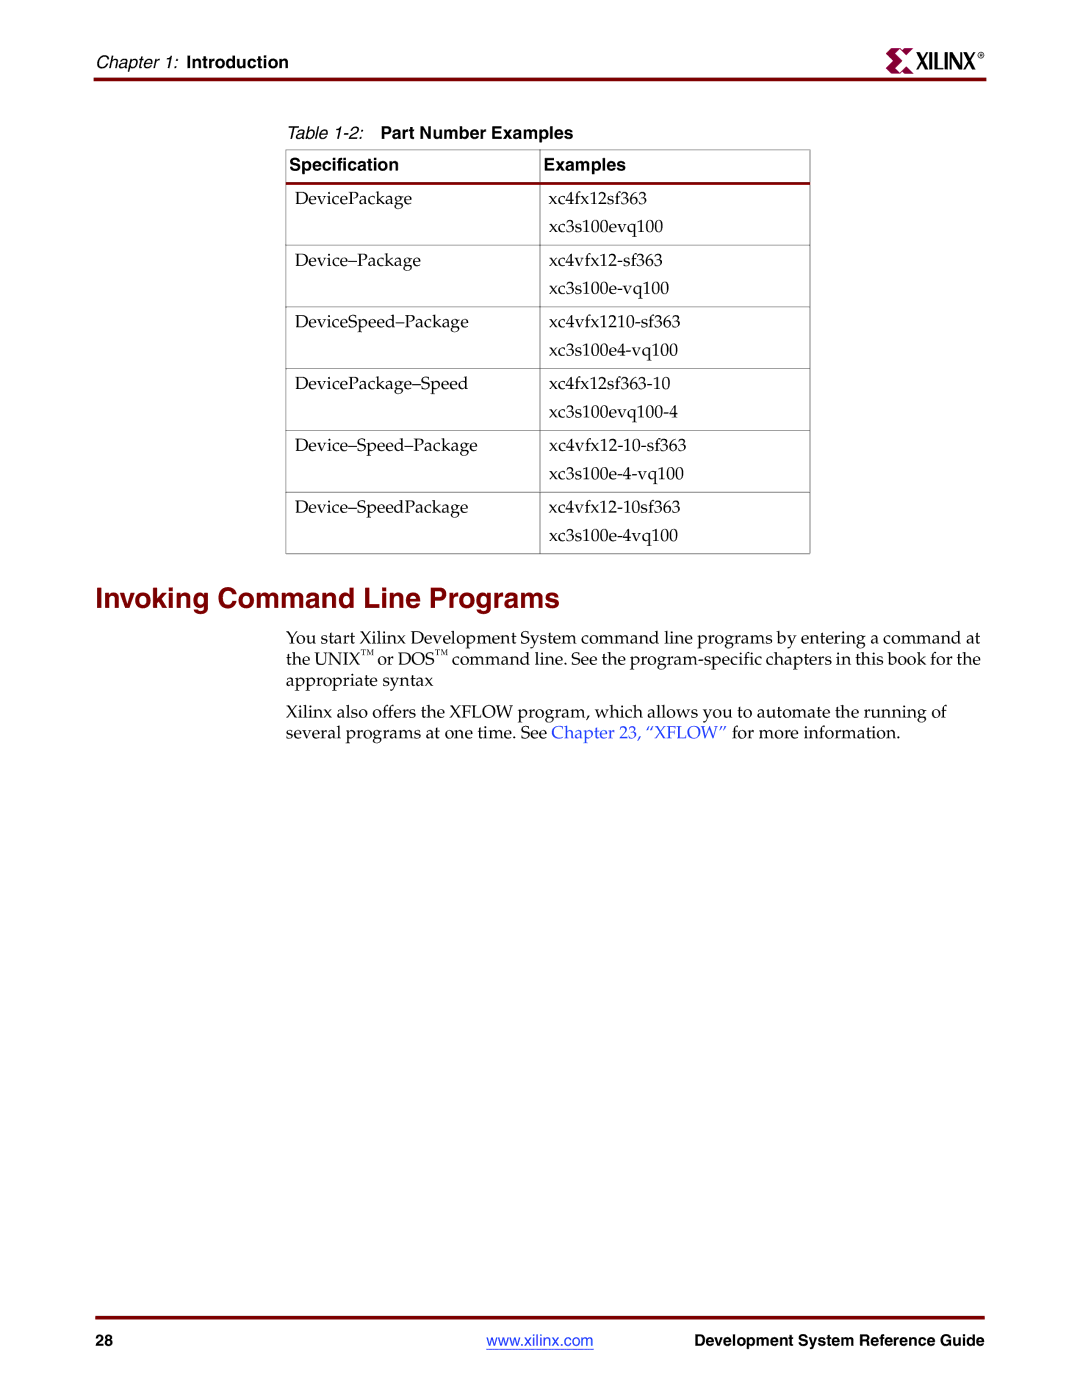 Xilinx 8.2i manual Invoking Command Line Programs, Introduction 2Part Number Examples Specification 